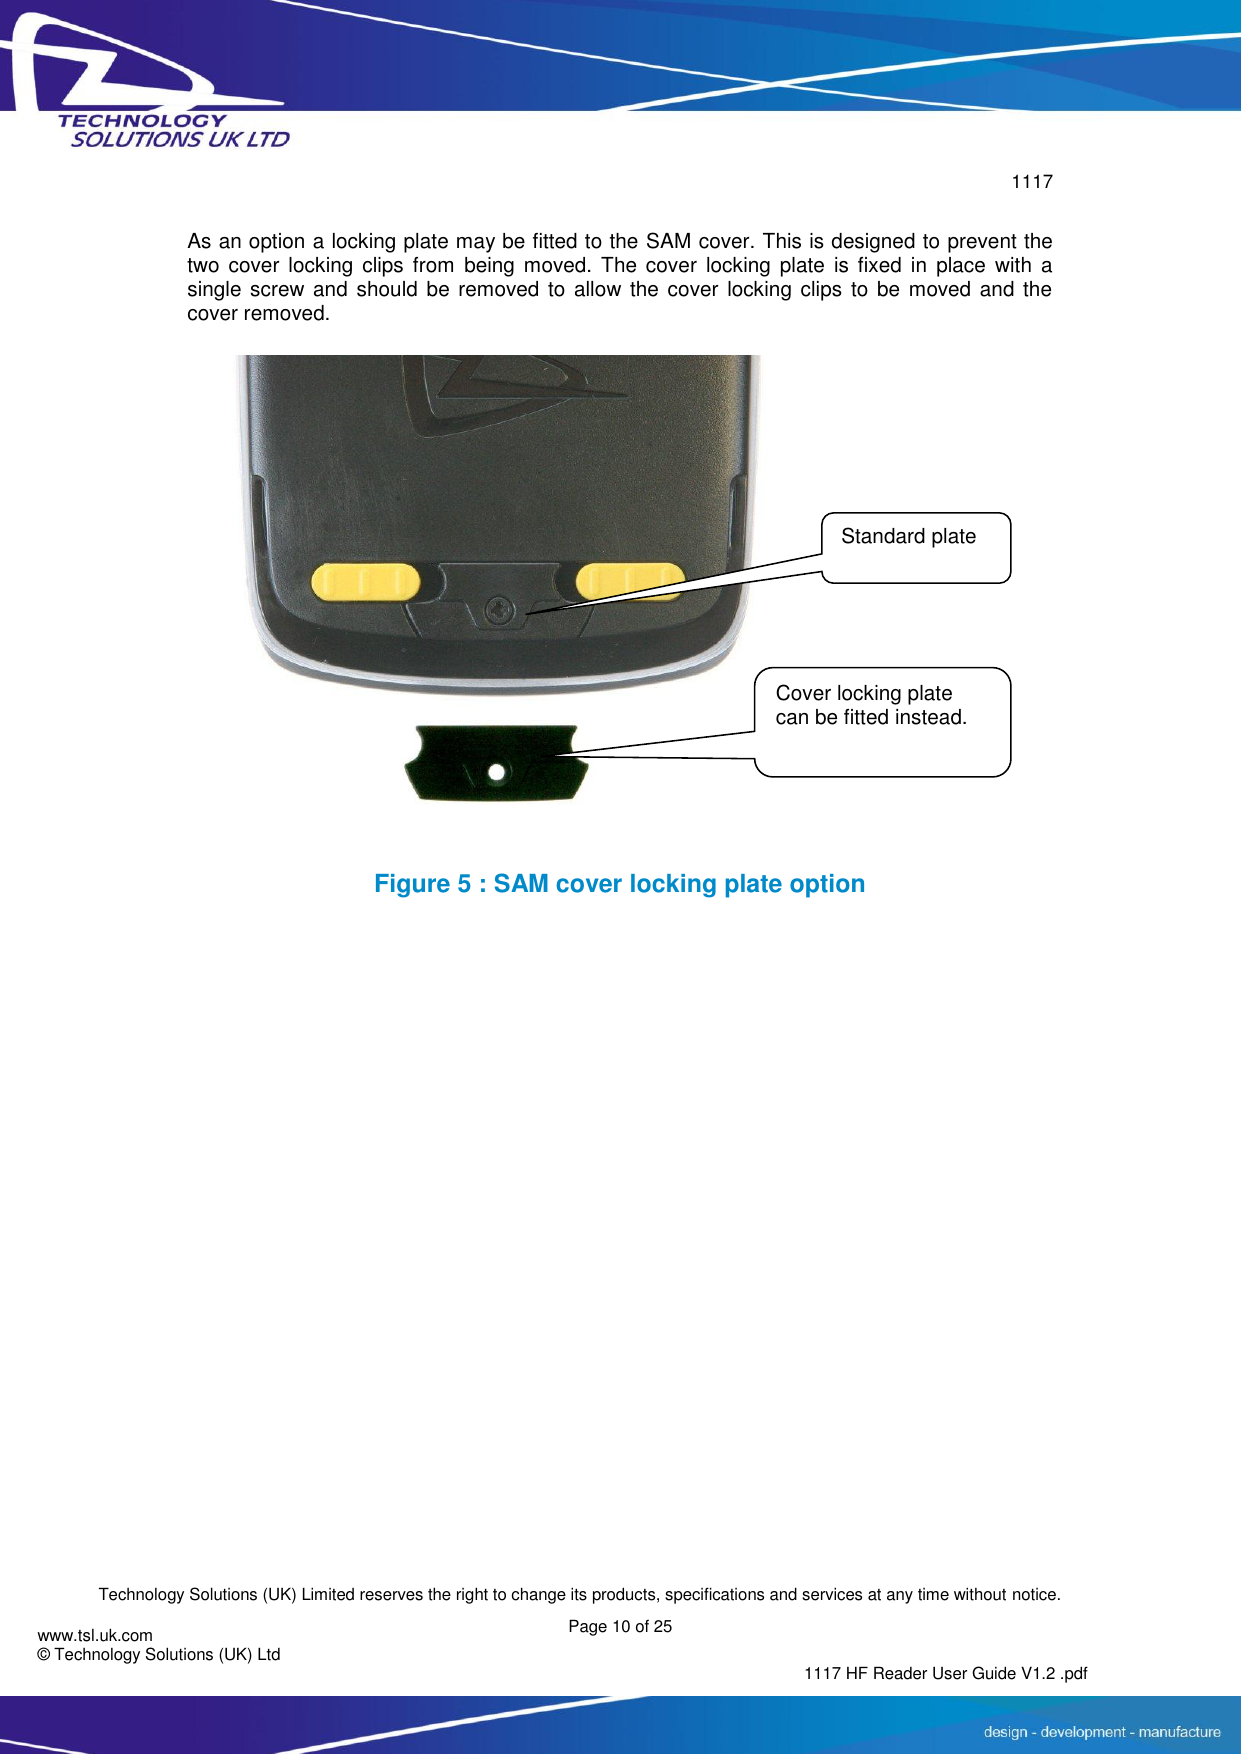        1117  Technology Solutions (UK) Limited reserves the right to change its products, specifications and services at any time without notice. Page 10 of 25 1117 HF Reader User Guide V1.2 .pdf www.tsl.uk.com © Technology Solutions (UK) Ltd   As an option a locking plate may be fitted to the SAM cover. This is designed to prevent the two cover  locking clips  from  being  moved. The  cover  locking  plate  is  fixed  in  place  with  a single screw and should be  removed to allow the cover locking  clips  to  be  moved and the cover removed.  Figure 5 : SAM cover locking plate option     Standard plate Cover locking plate can be fitted instead. 